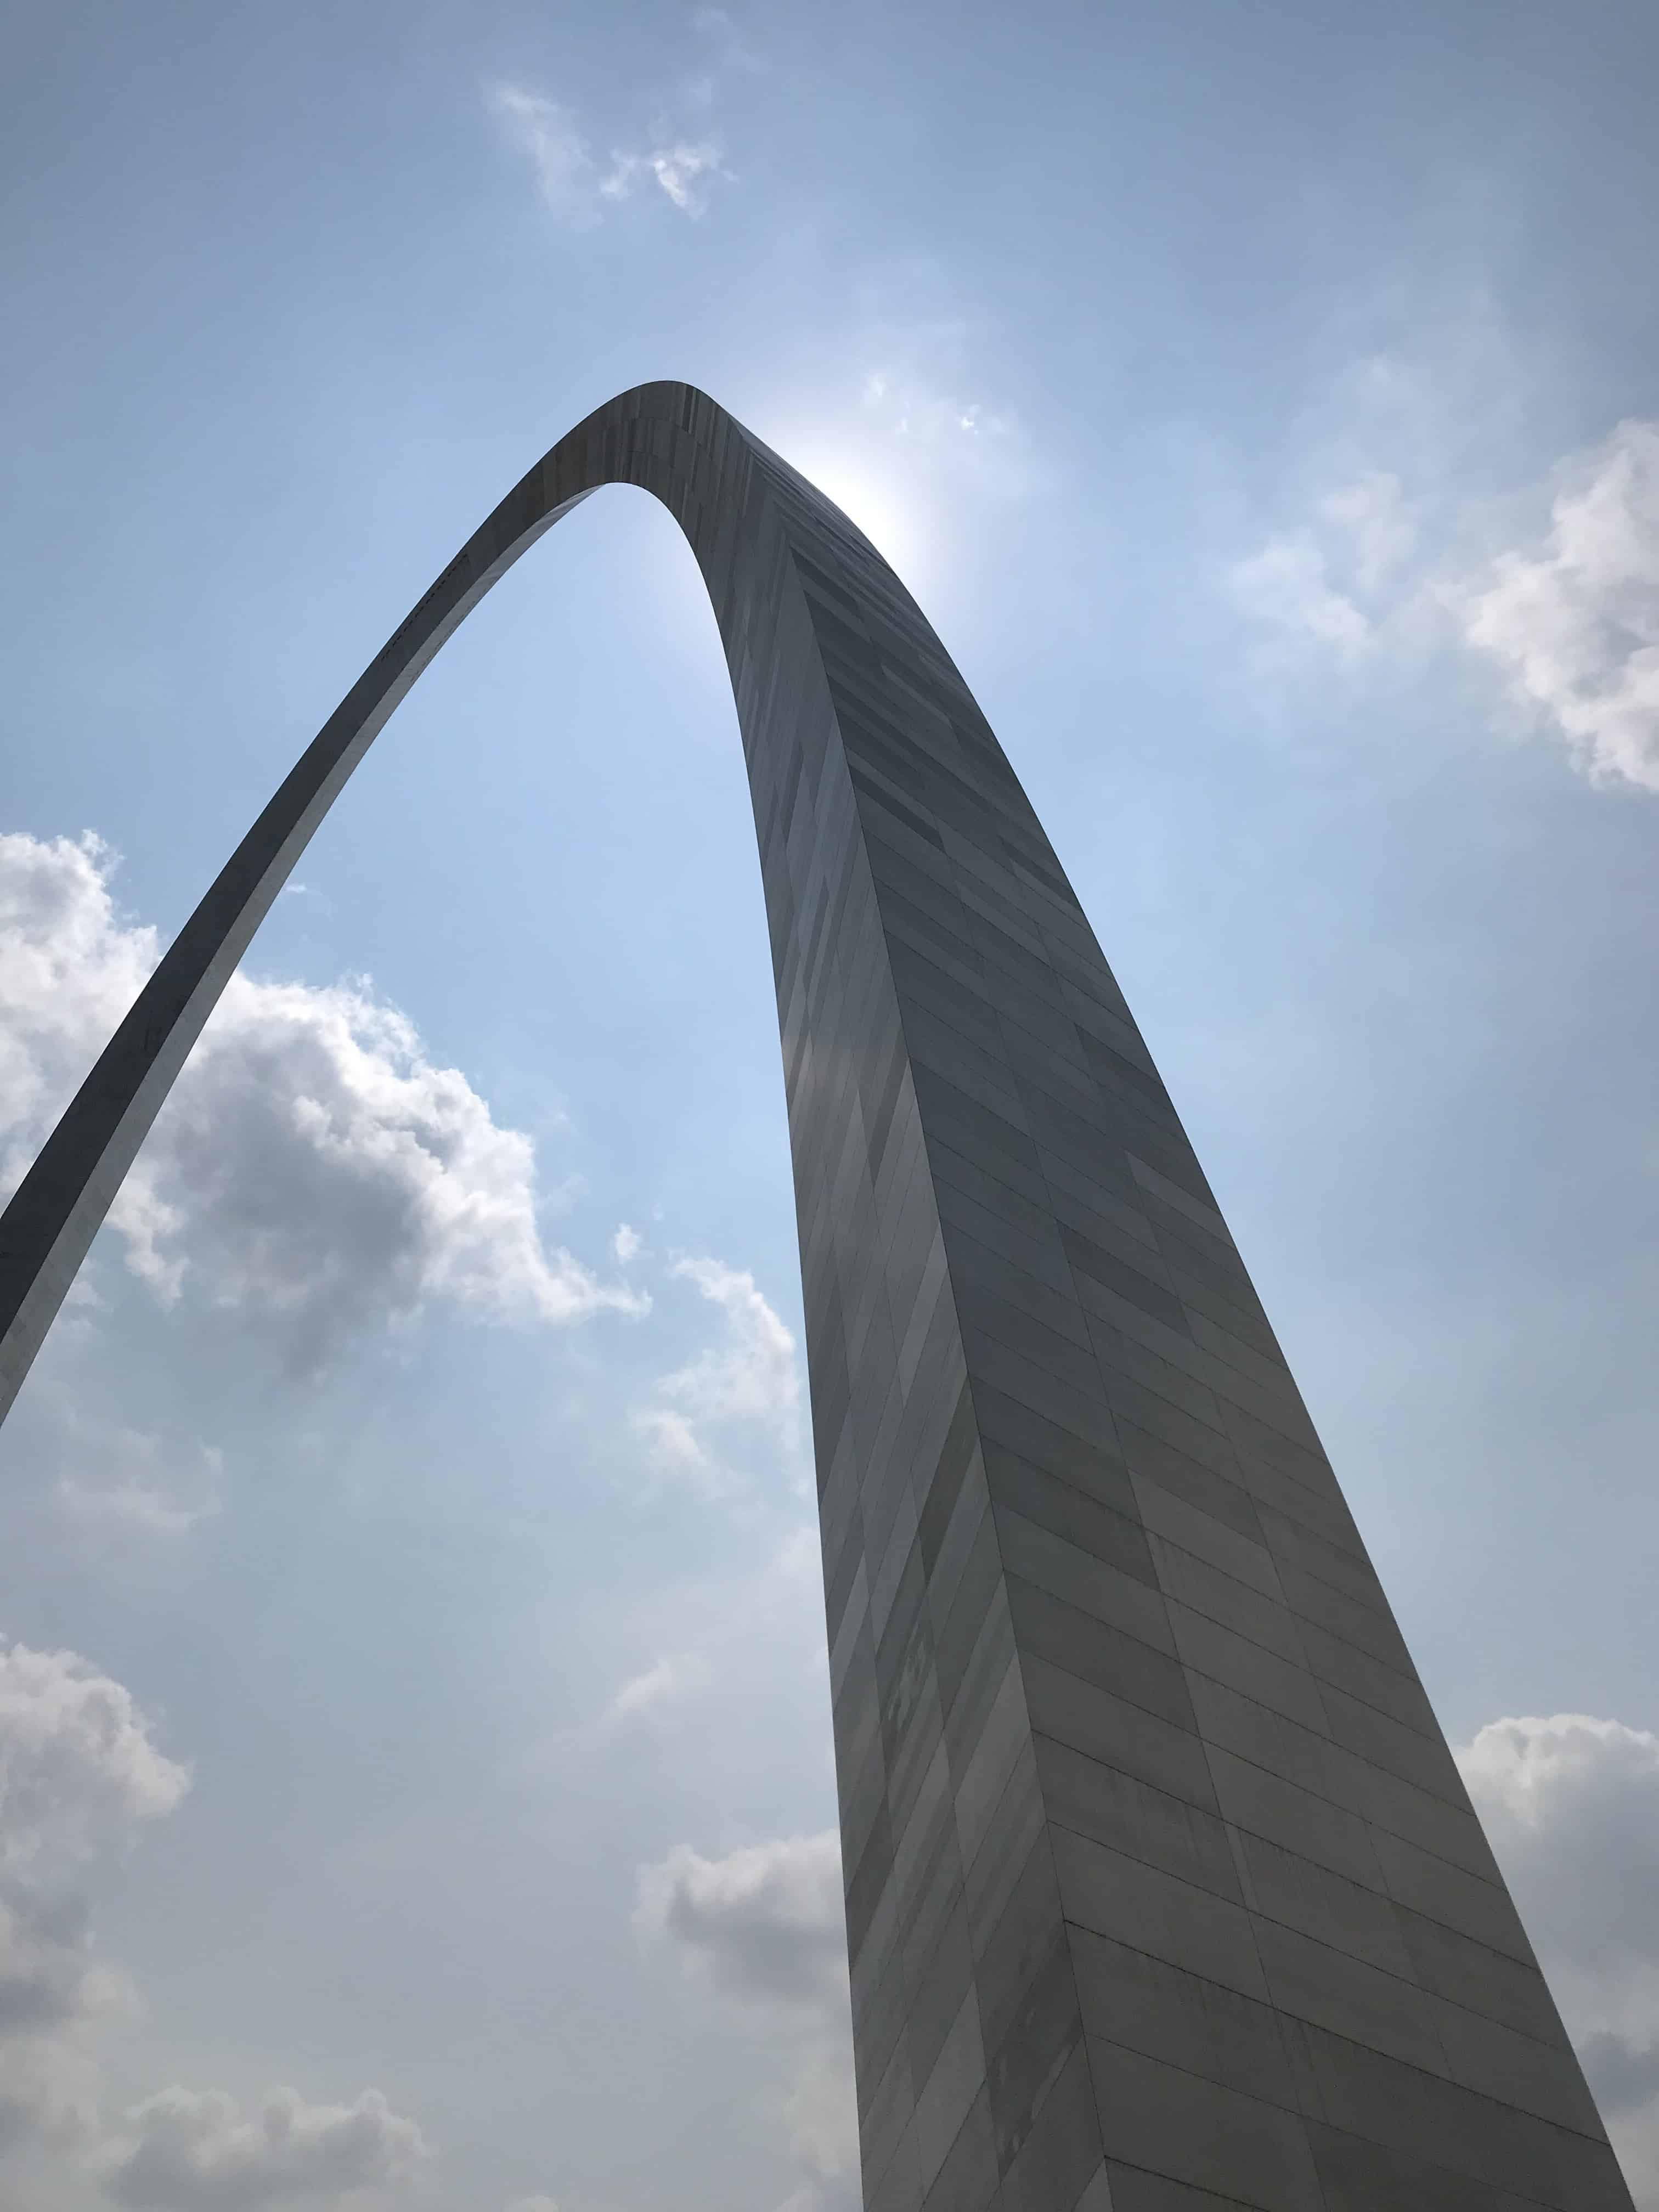 Gateway Arch NP, best known of the national parks in Missouri